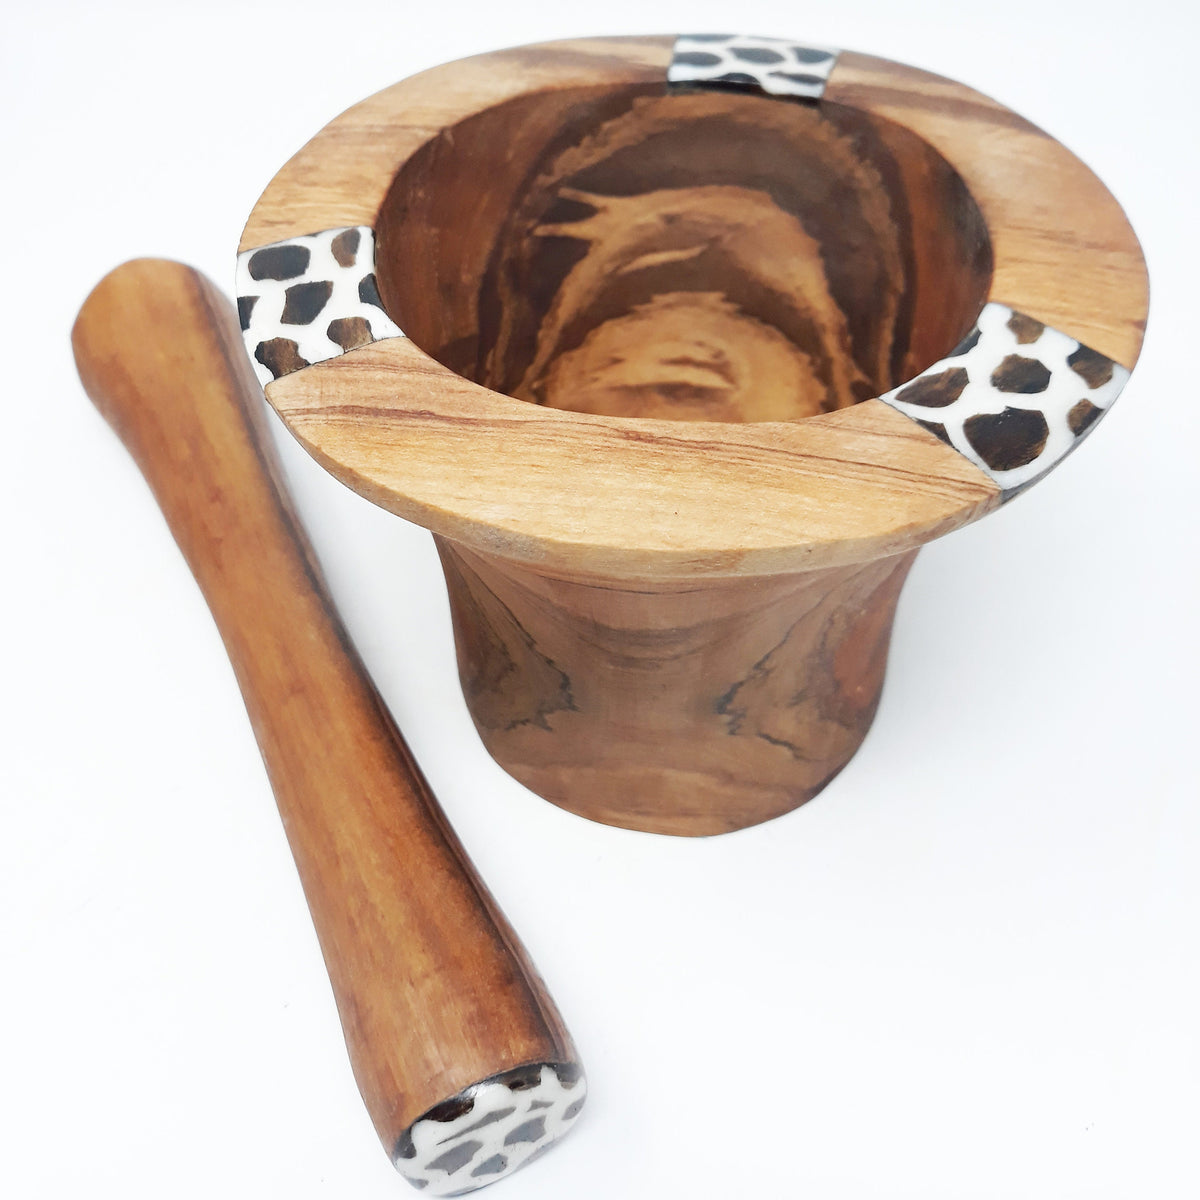 Traditional Olive Wood Pestle and Mortar, Rustic Pestle and Mortar, Herb Grinder,  Wooden Spice Grinder, Rustic Wooden Pestle and Mortar